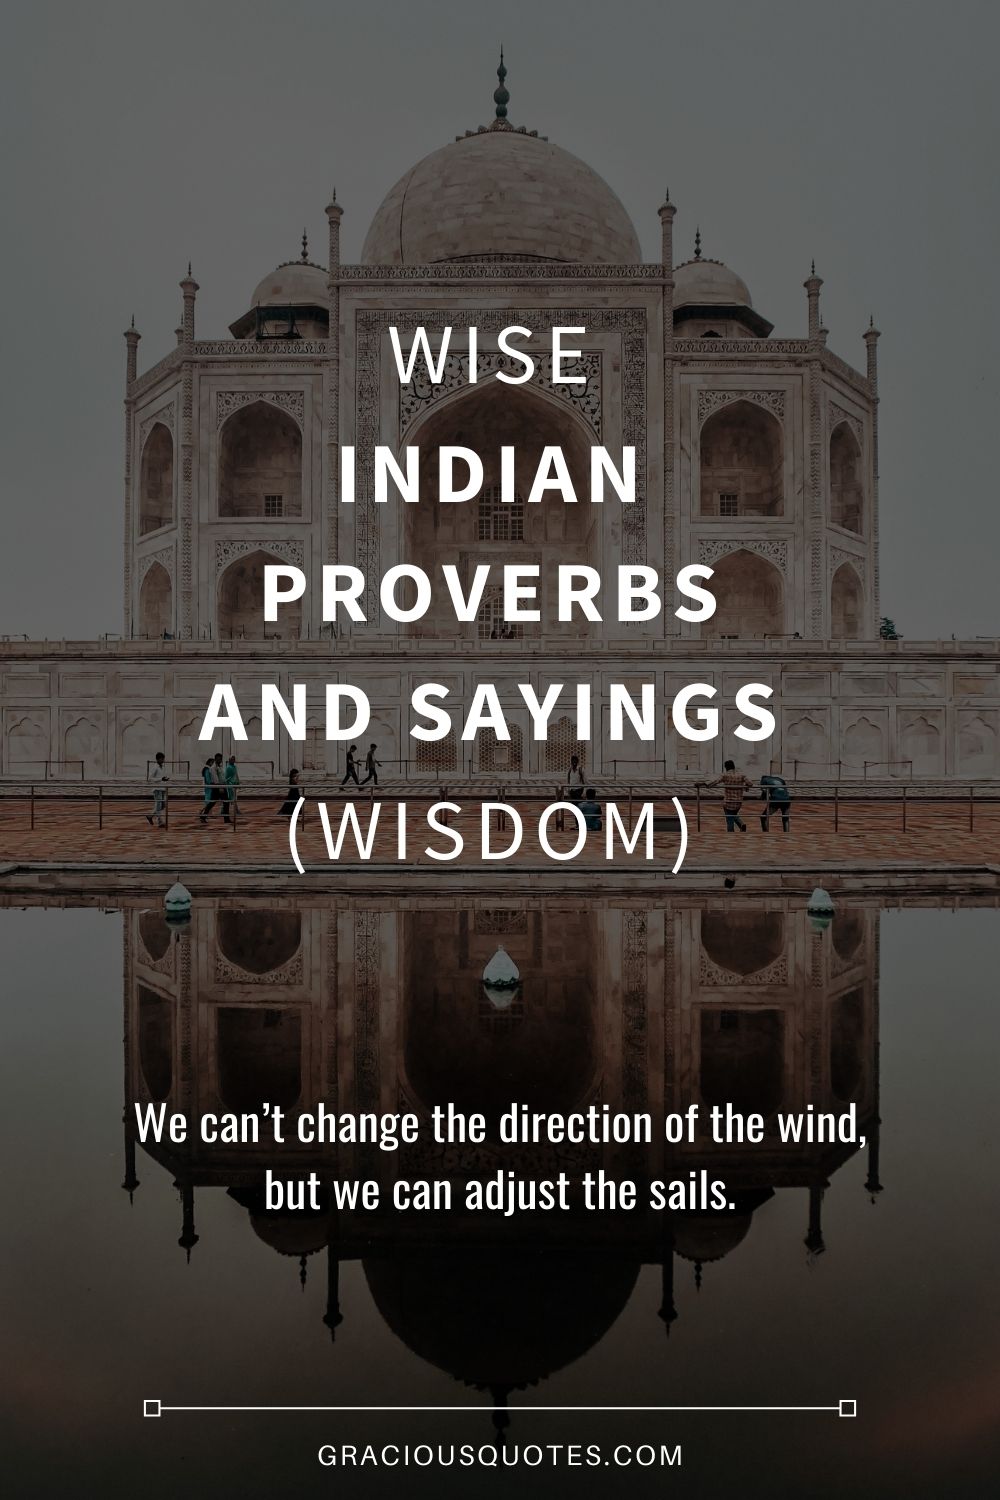 83 Wise Indian Proverbs and Sayings (WISDOM)